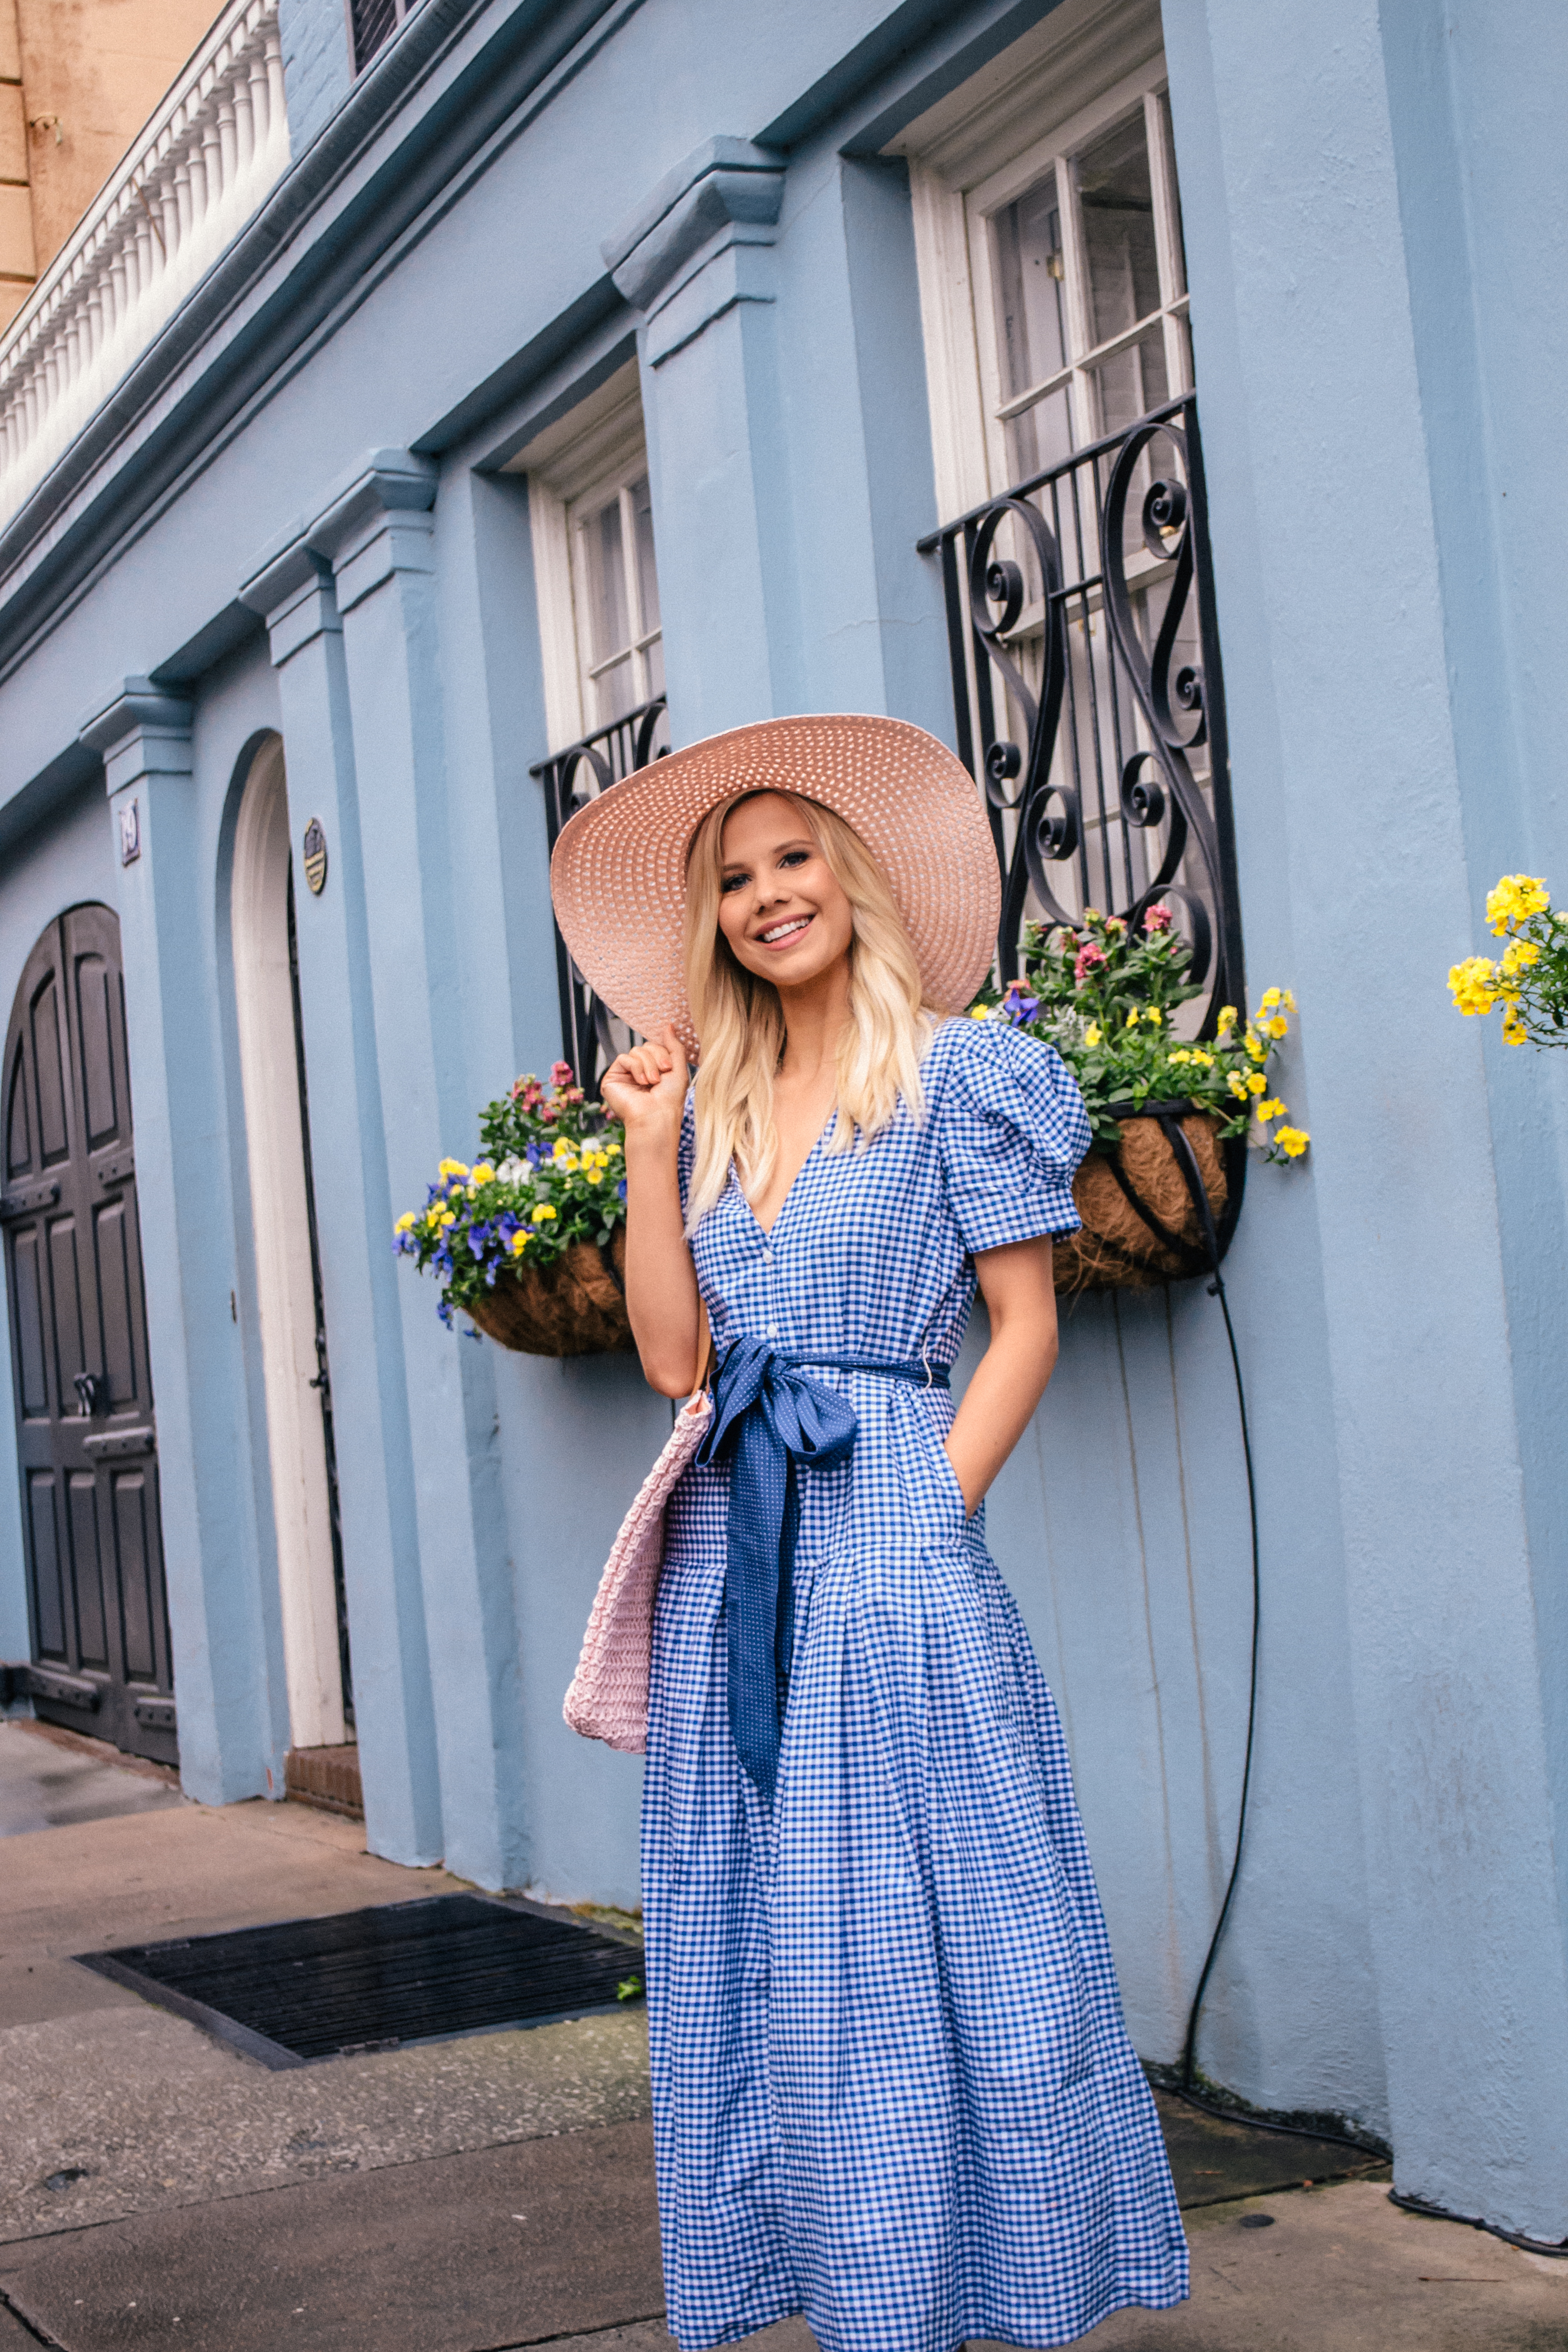 spring style, gingham for spring, gingham dress, vintage style, retro summer style #springstyle #style #spring #gingham